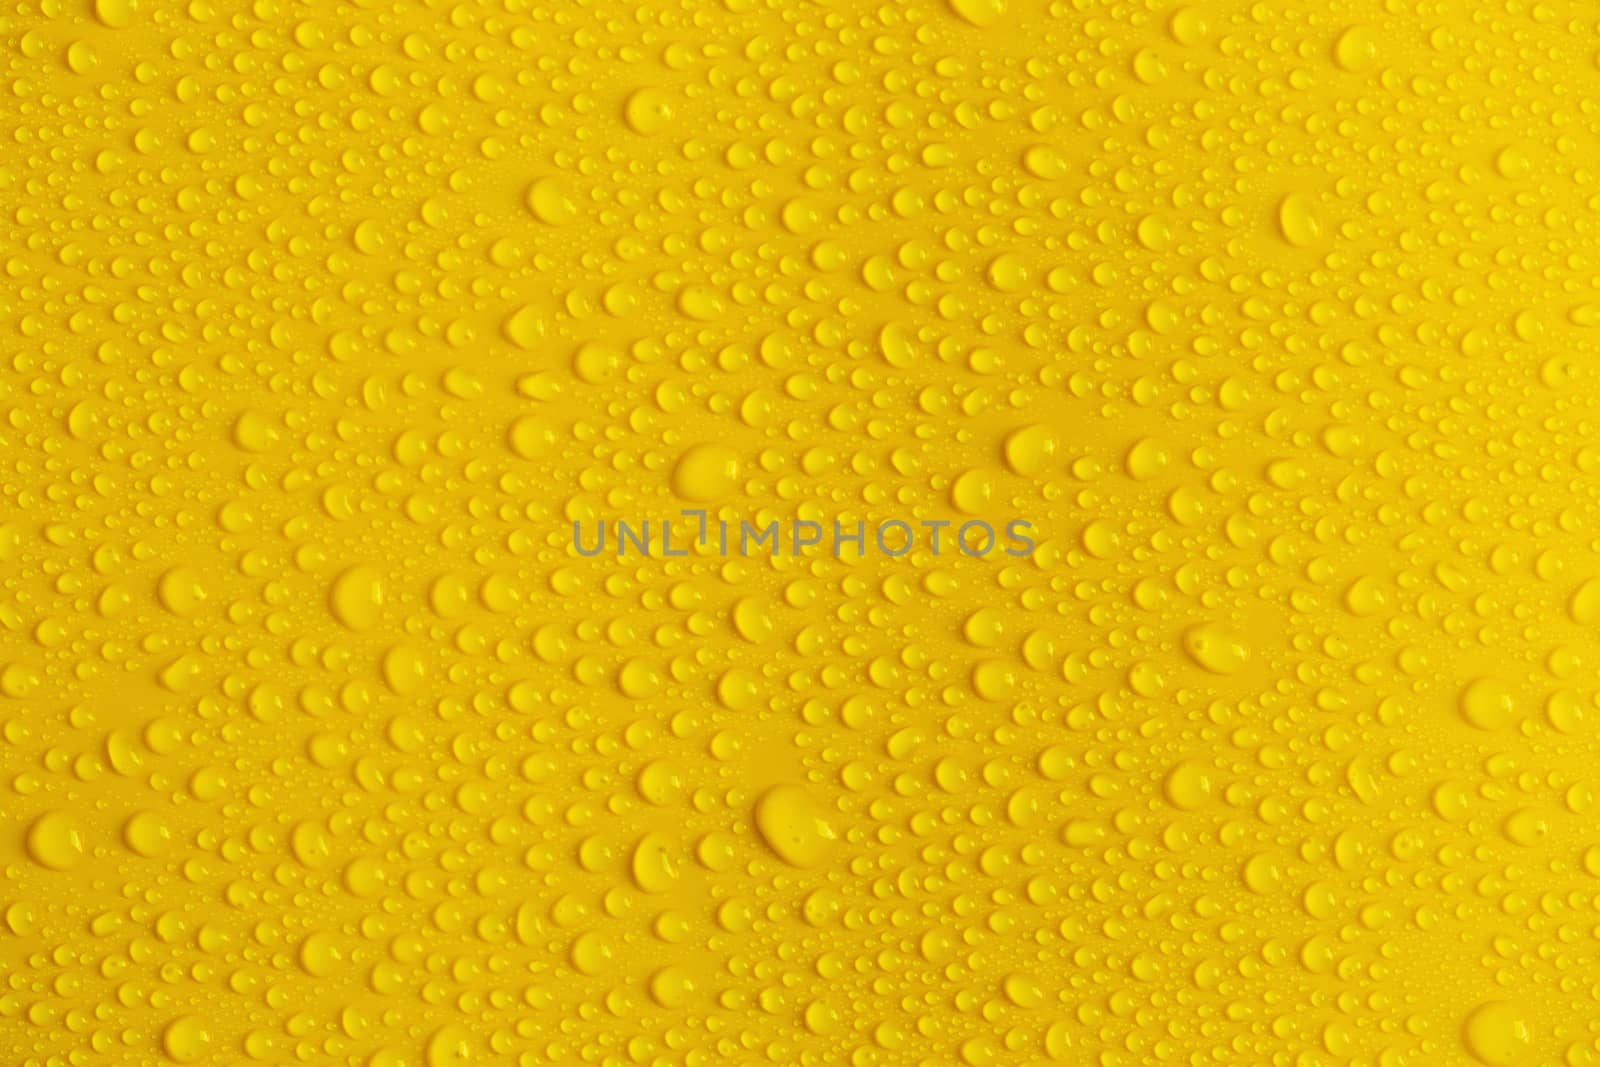 Rain or Water drops on yellow background.